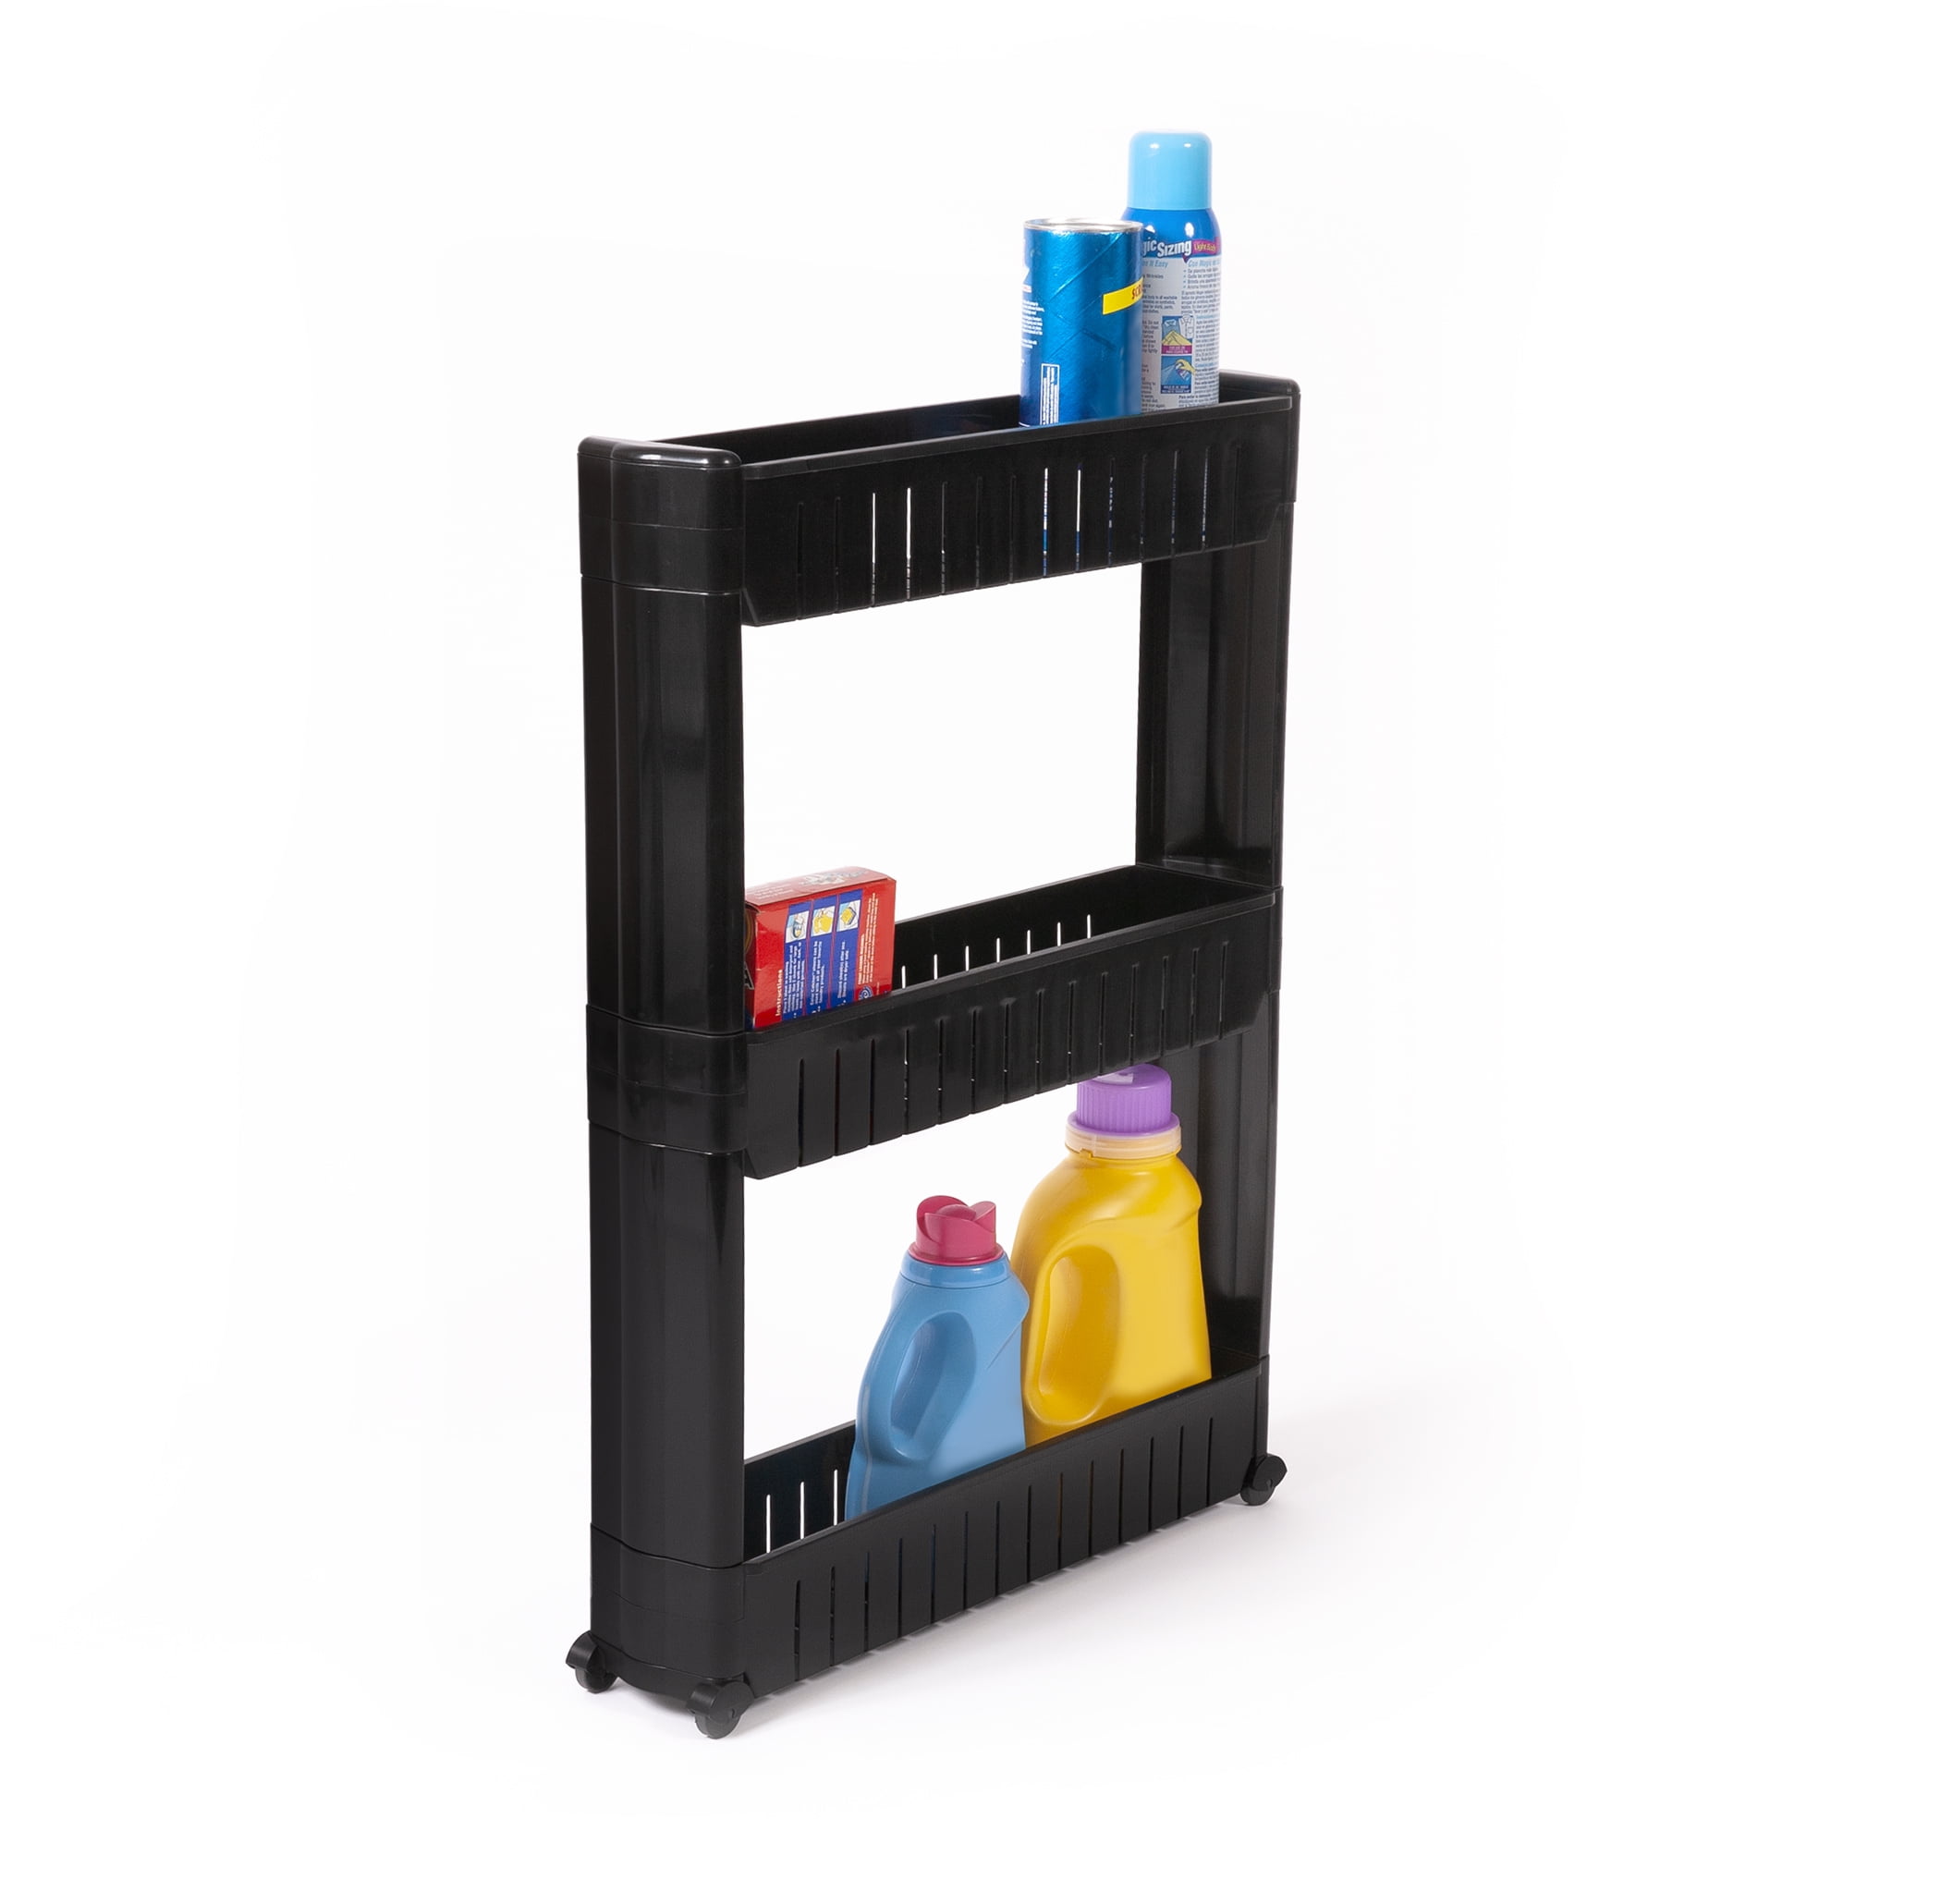 Slide-A-Shelf Made-To-Fit 3 Tier Adjustable Tower Cabinet